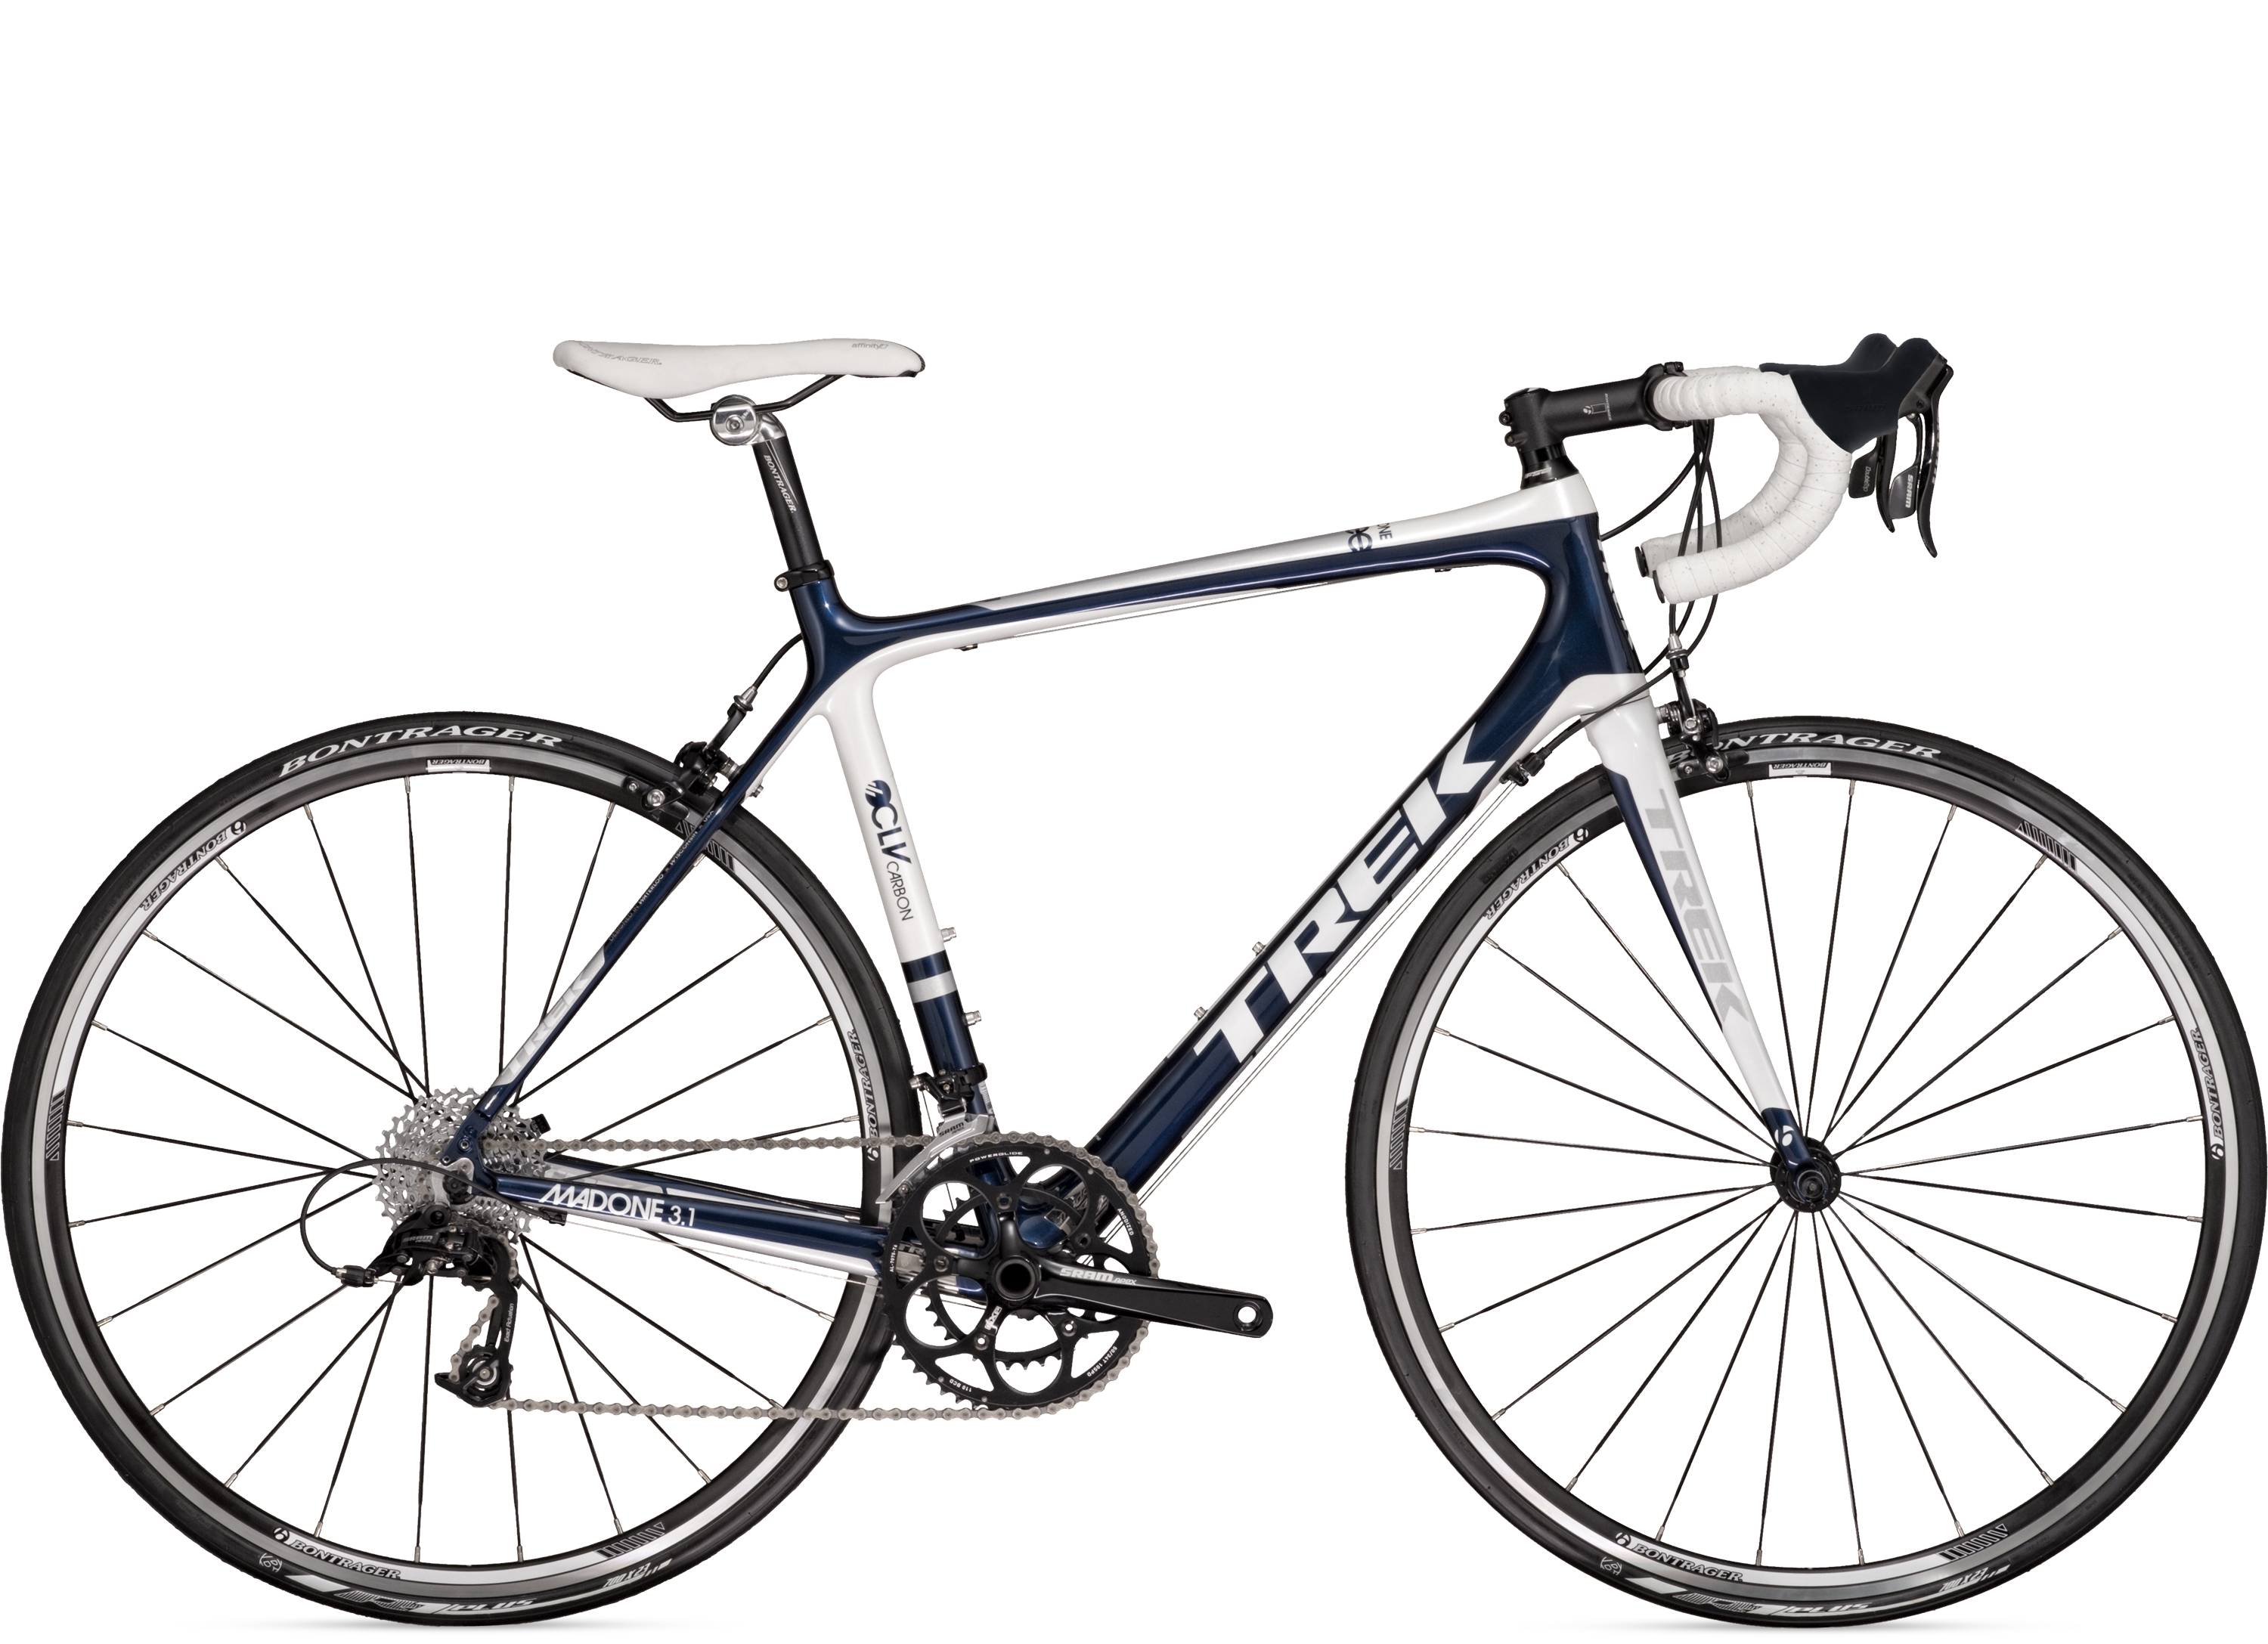 2012 Madone 3.1 APEX H2 (Compact 